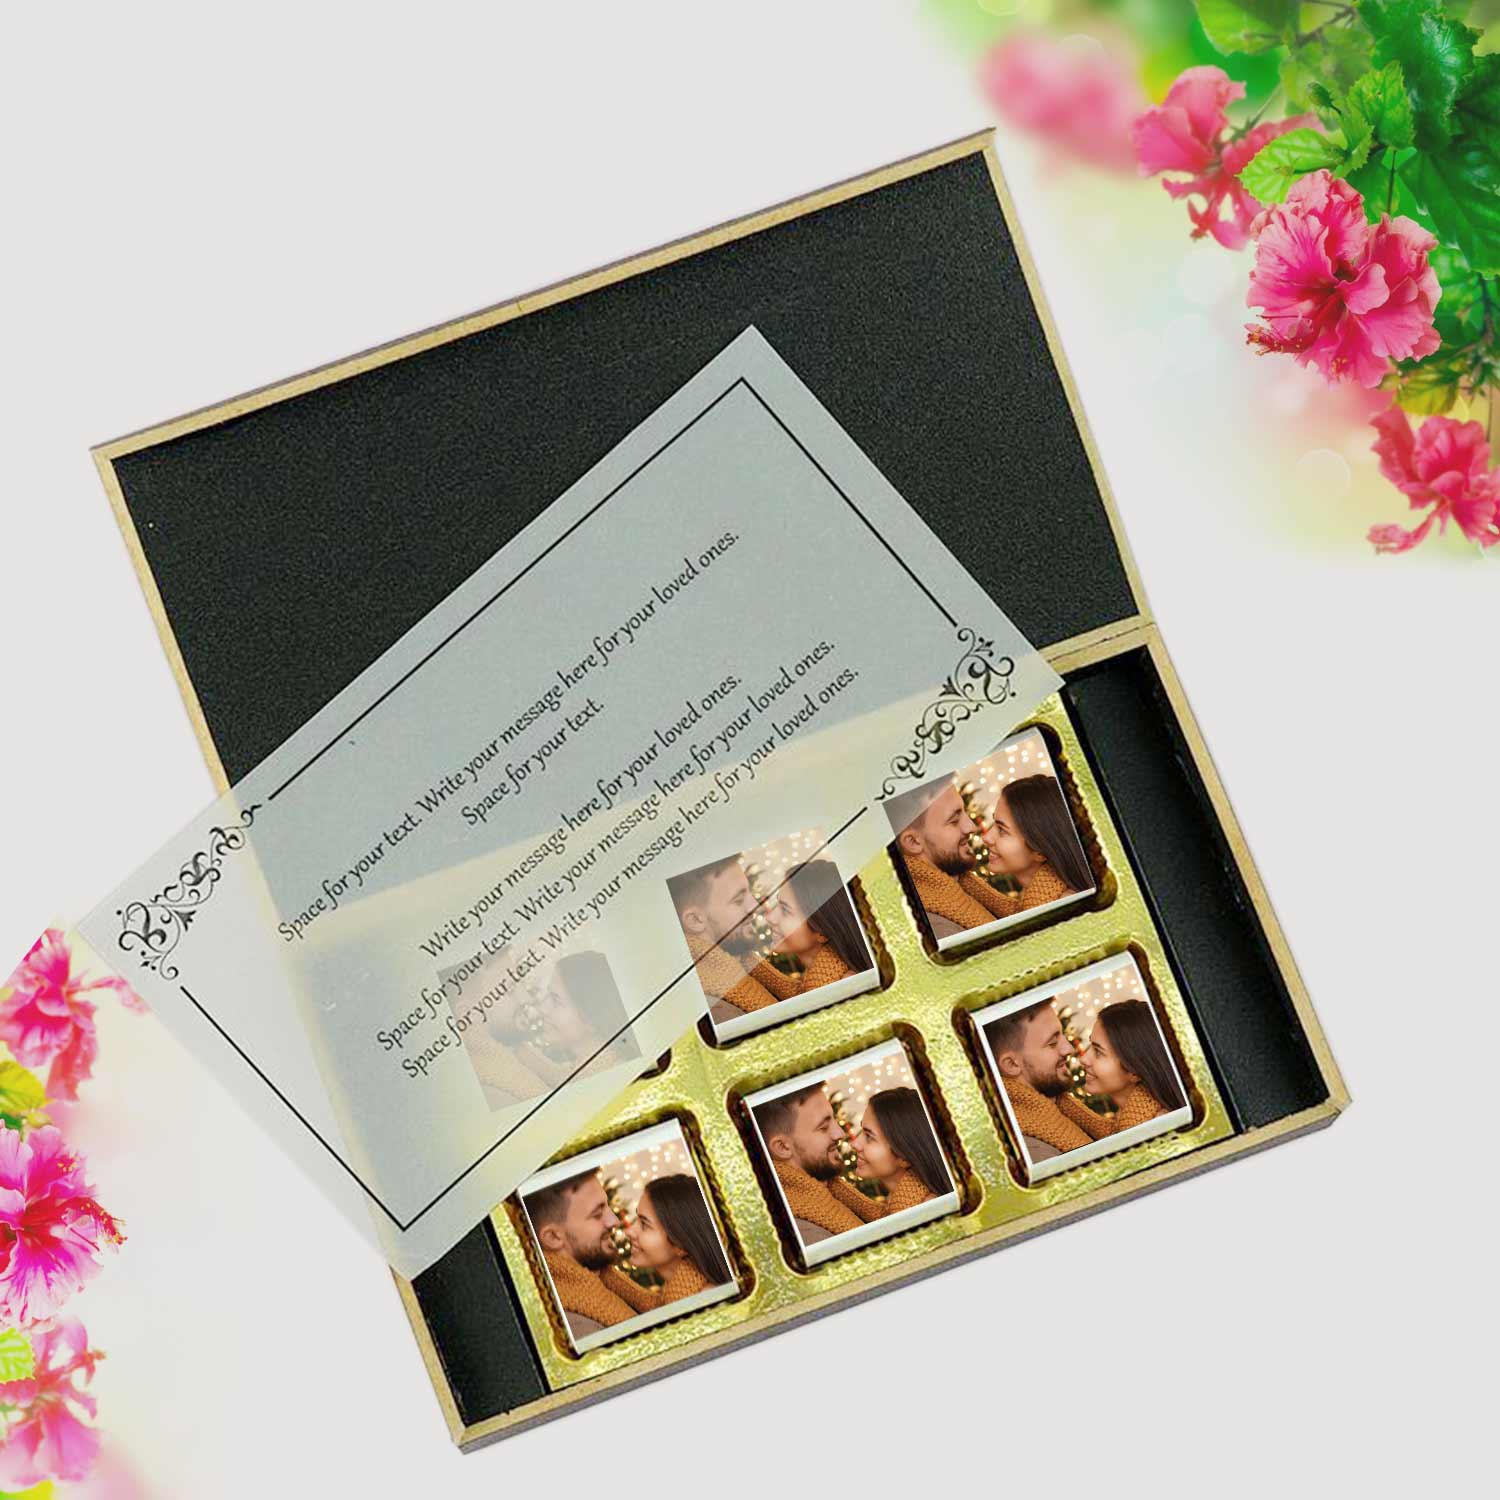 customized black wooden box with all wrapper printed chocolates. There is also a personalized message printed on Message paper inside the box.